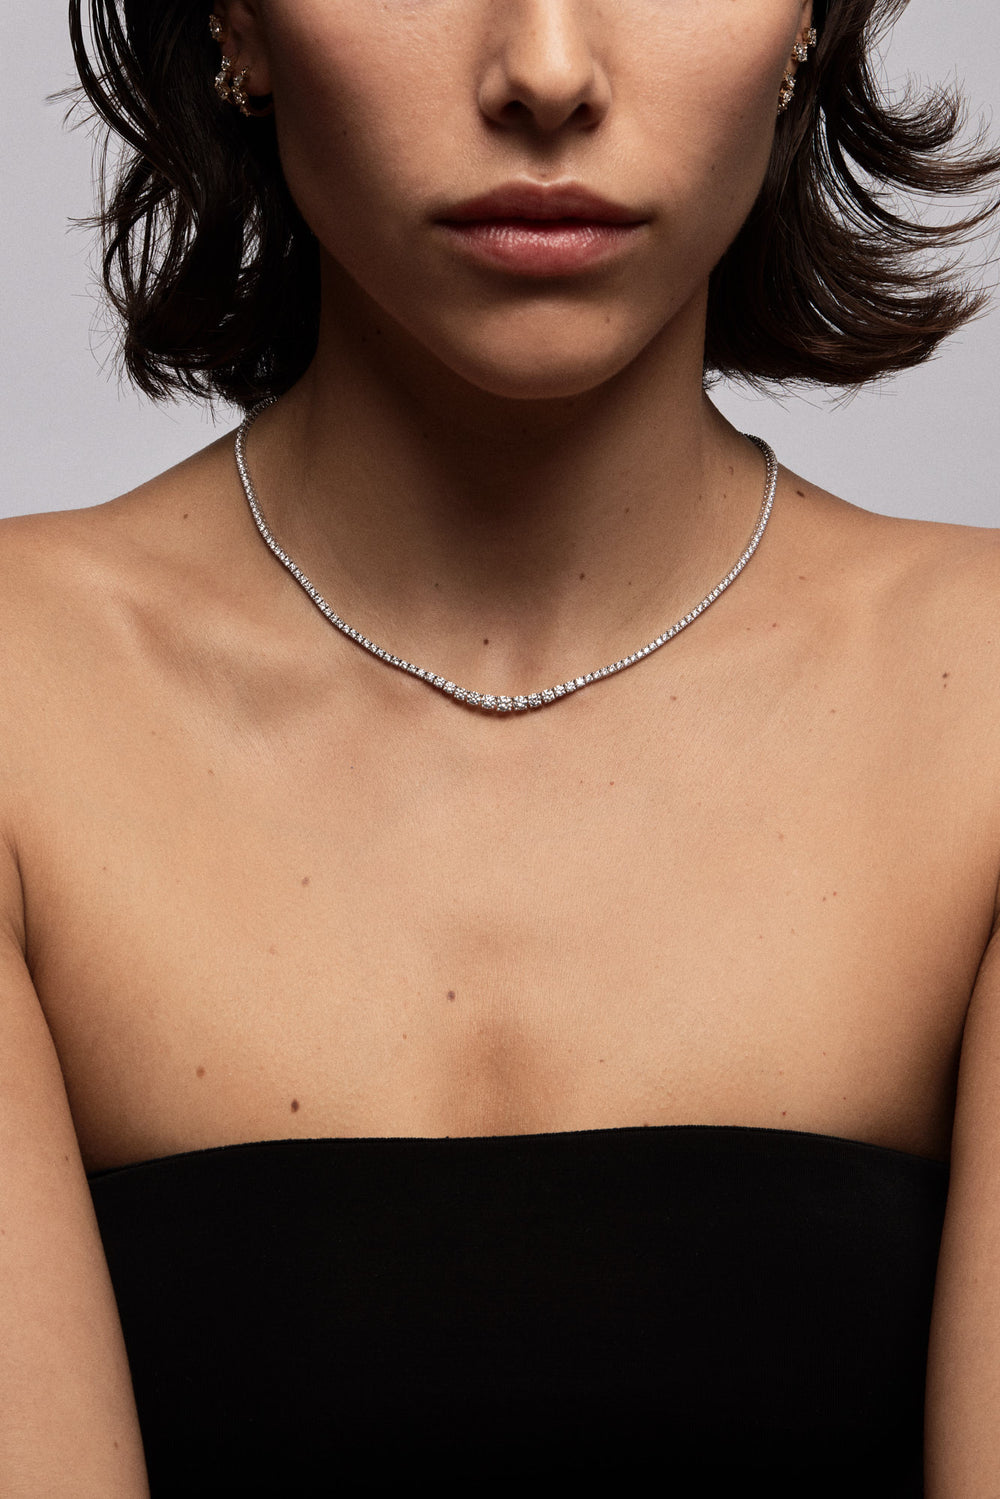 Small Graduating Tennis Necklace | 18K White Gold